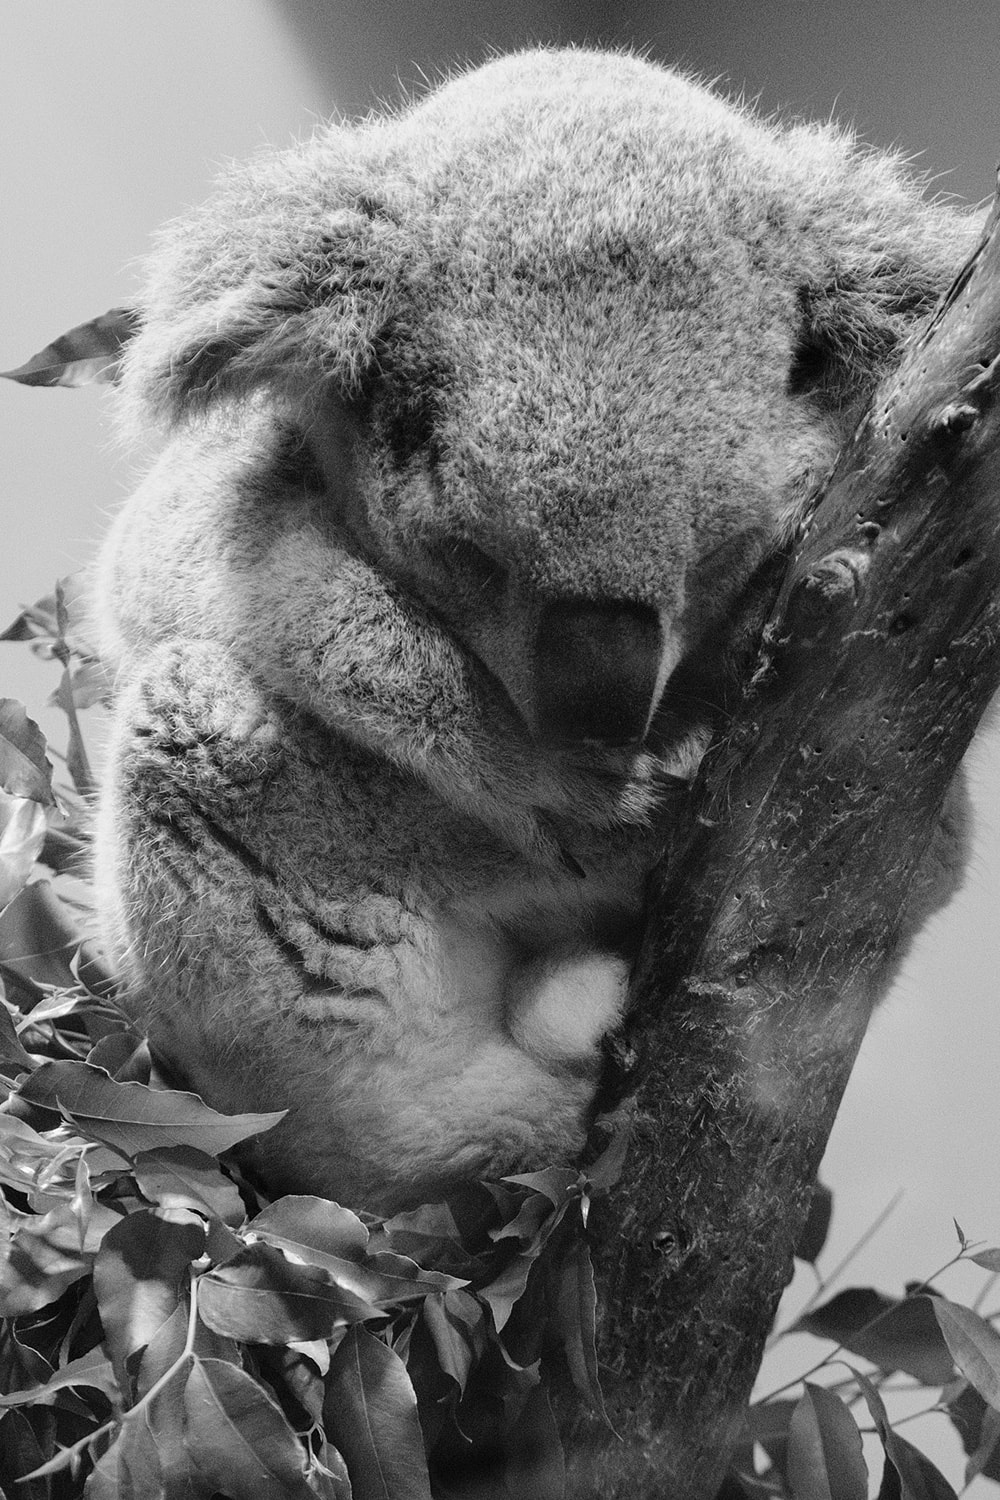 Black and white portrait photo of a koala sleeping in a tree at the San Francisco Zoo.